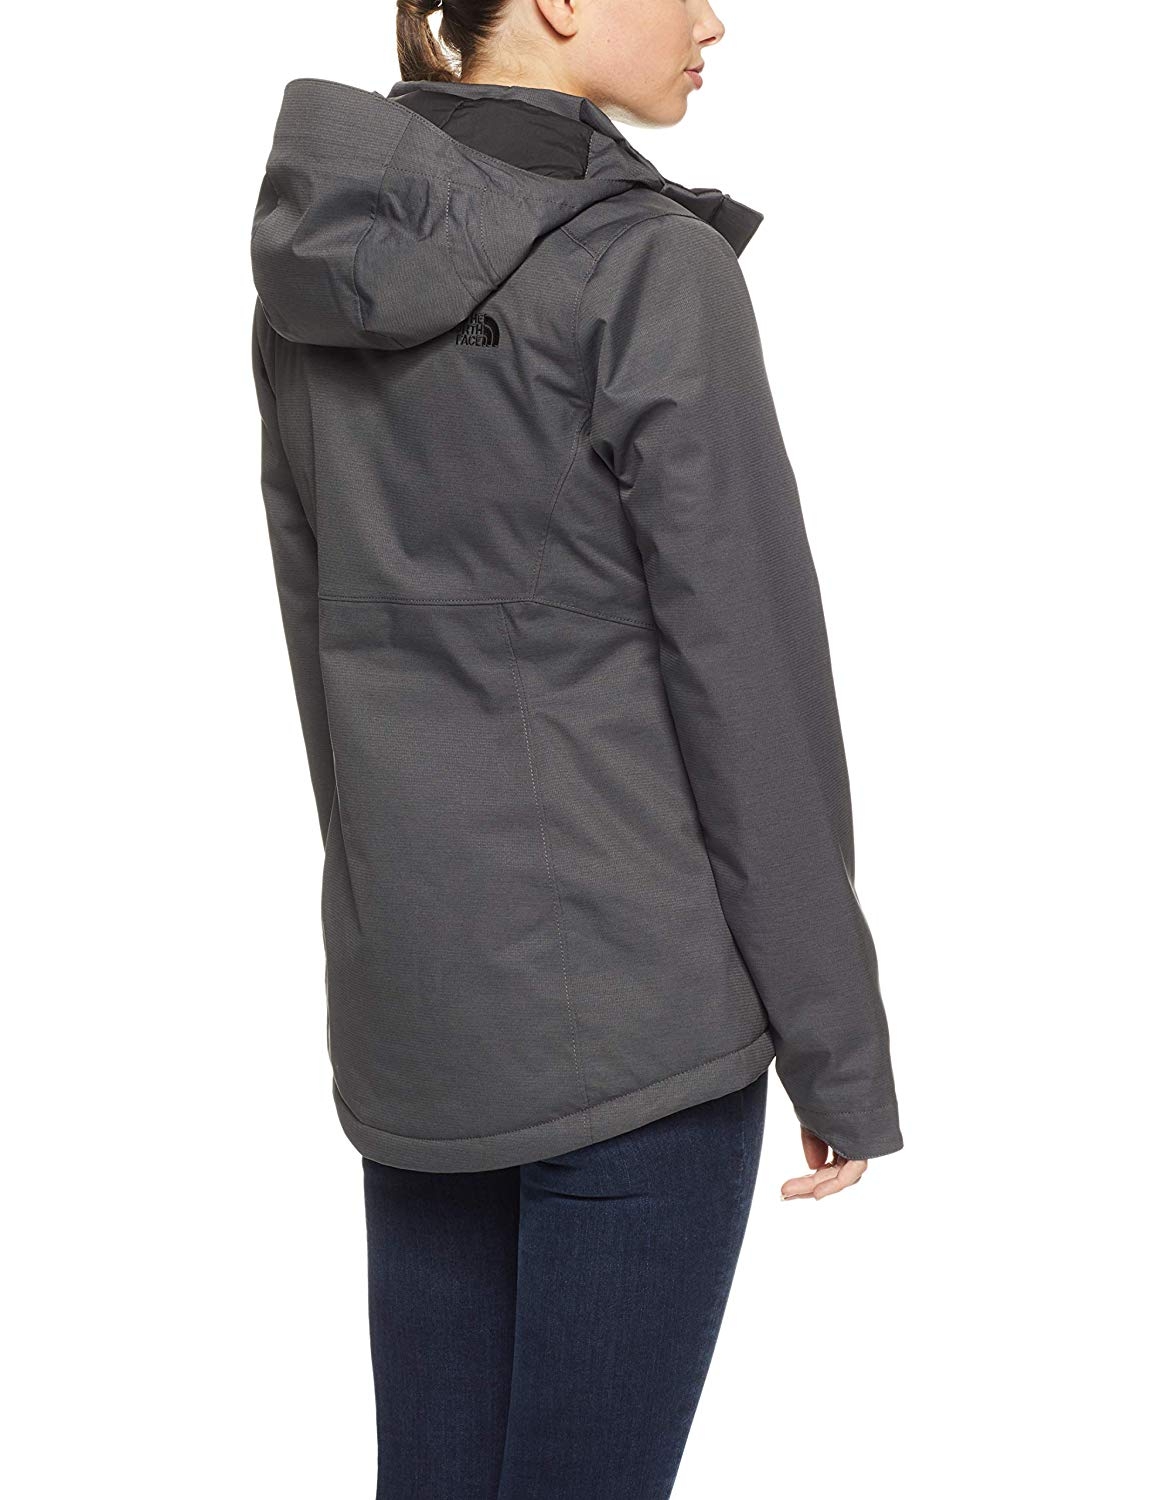 The North Face - Inlux 2.0 Insulated Rain Jacket Women's - Clothing ...